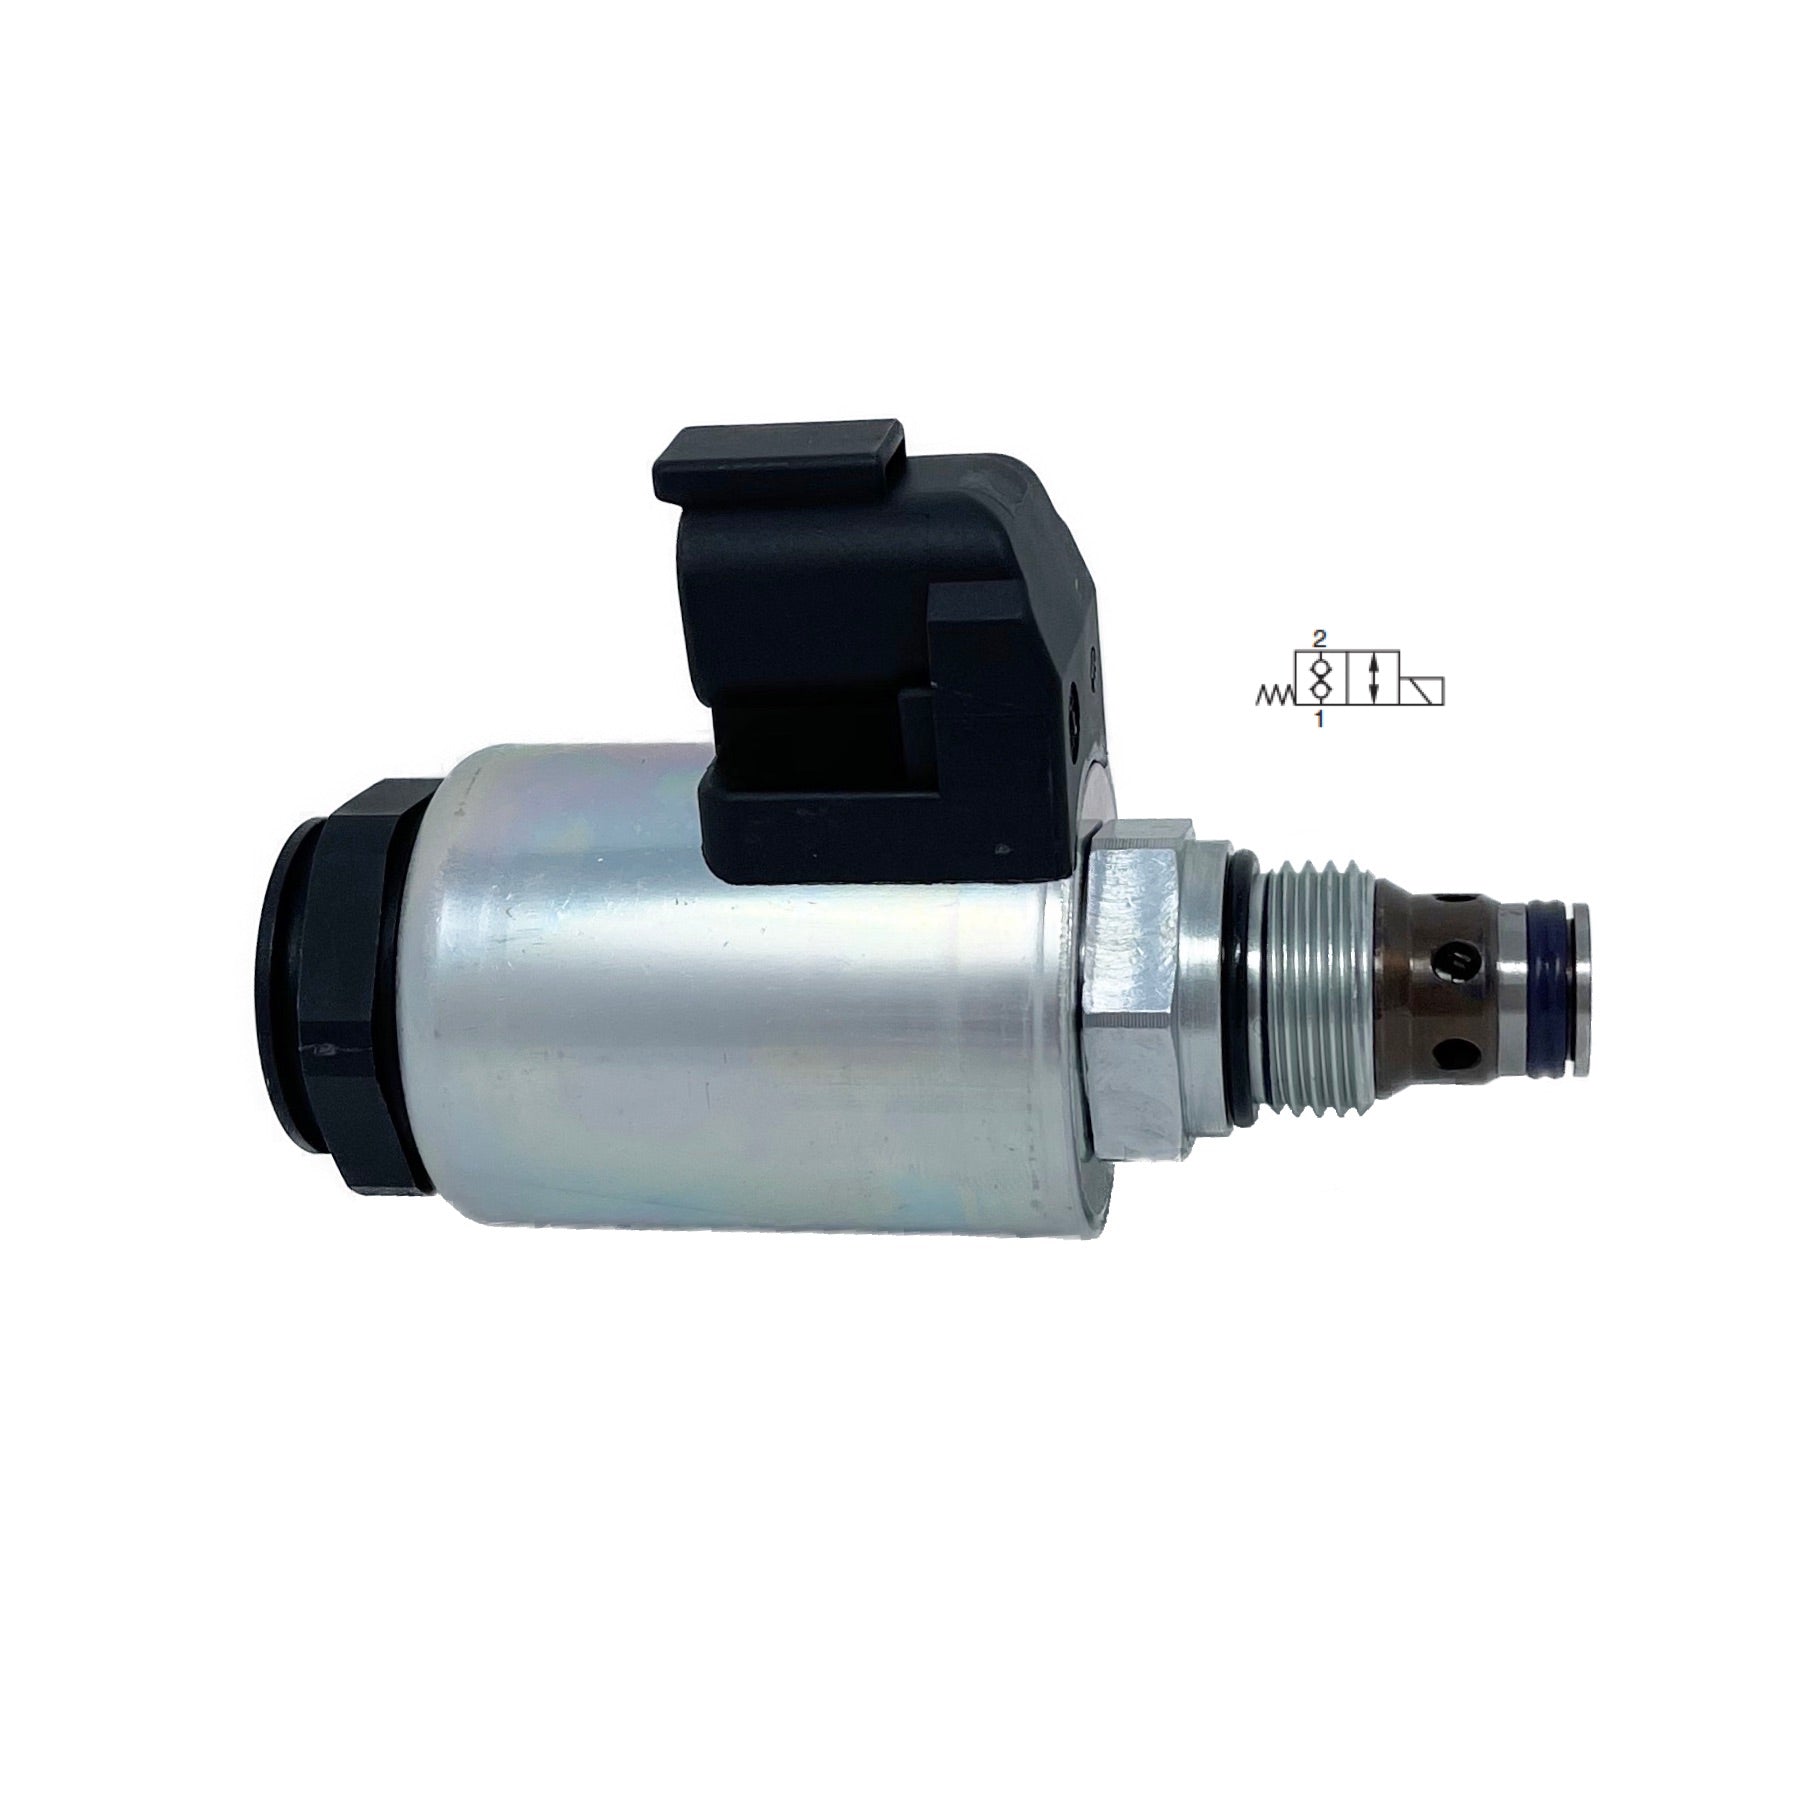 SD1E-A2/H2S5A-24DT : Argo DCV, 8GPM, 5100psi, 2P2W, C-8-2, 24 VDC Deutsch, Check 1 to 2 Neutral